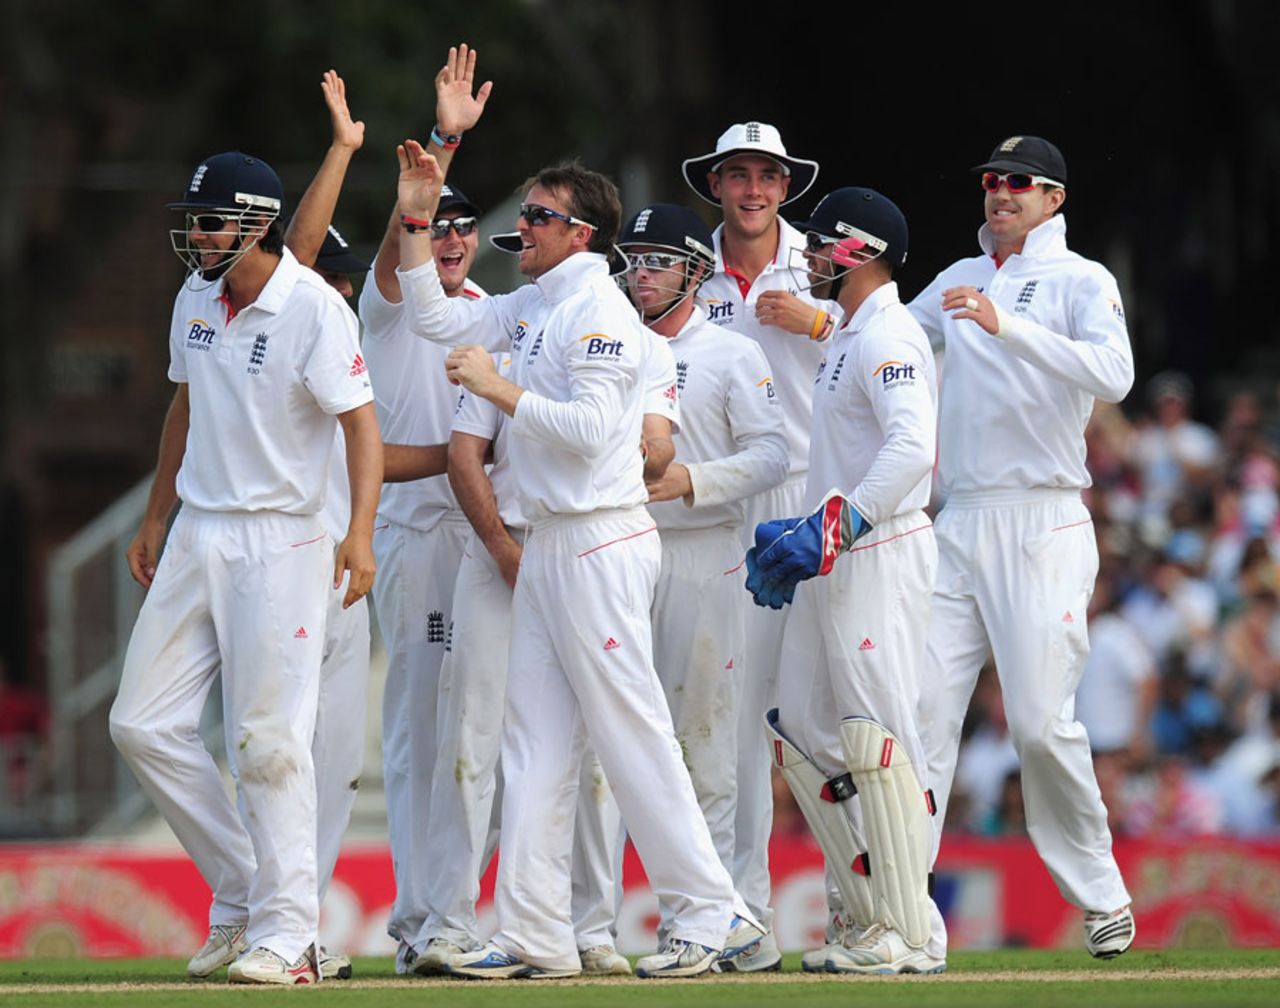 Graeme Swann celebrates after winning an lbw appeal against Suresh Raina, England v India, 4th Test, The Oval, 5th day, August 22, 2011